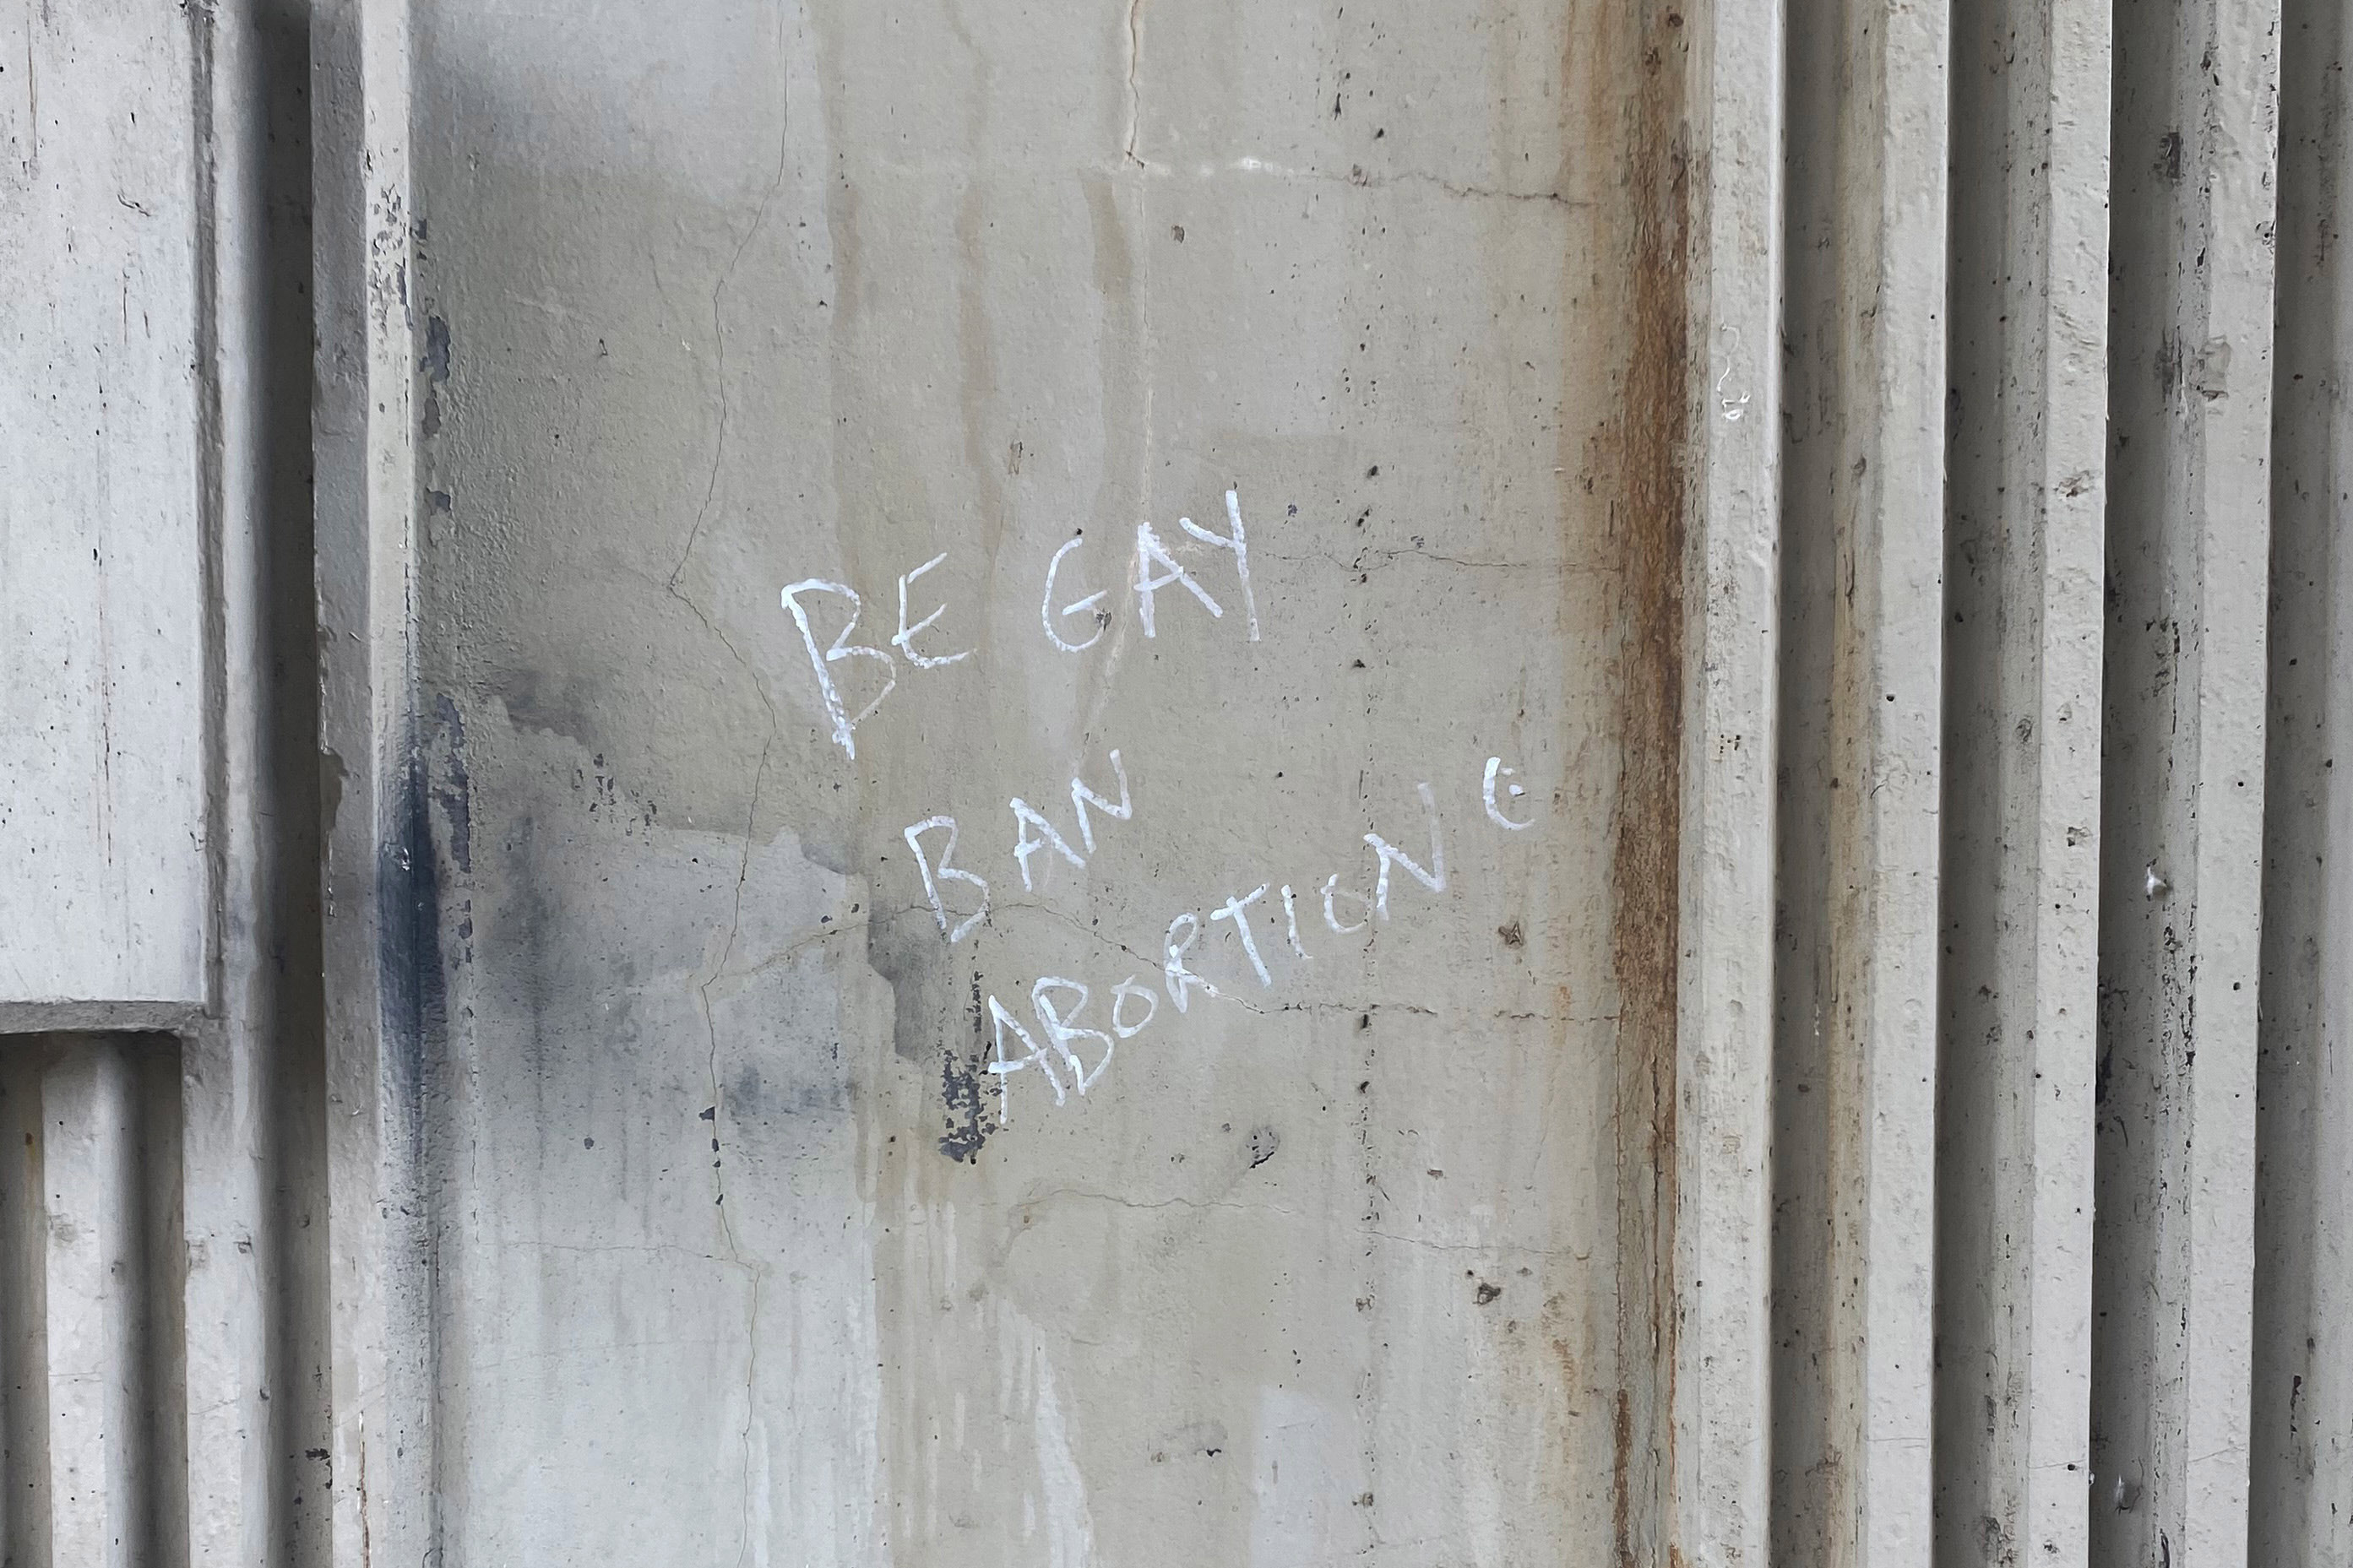 A photograph of graffiti written in white marker on a dilapidated wall. It reads, "be gay / ban abortion."